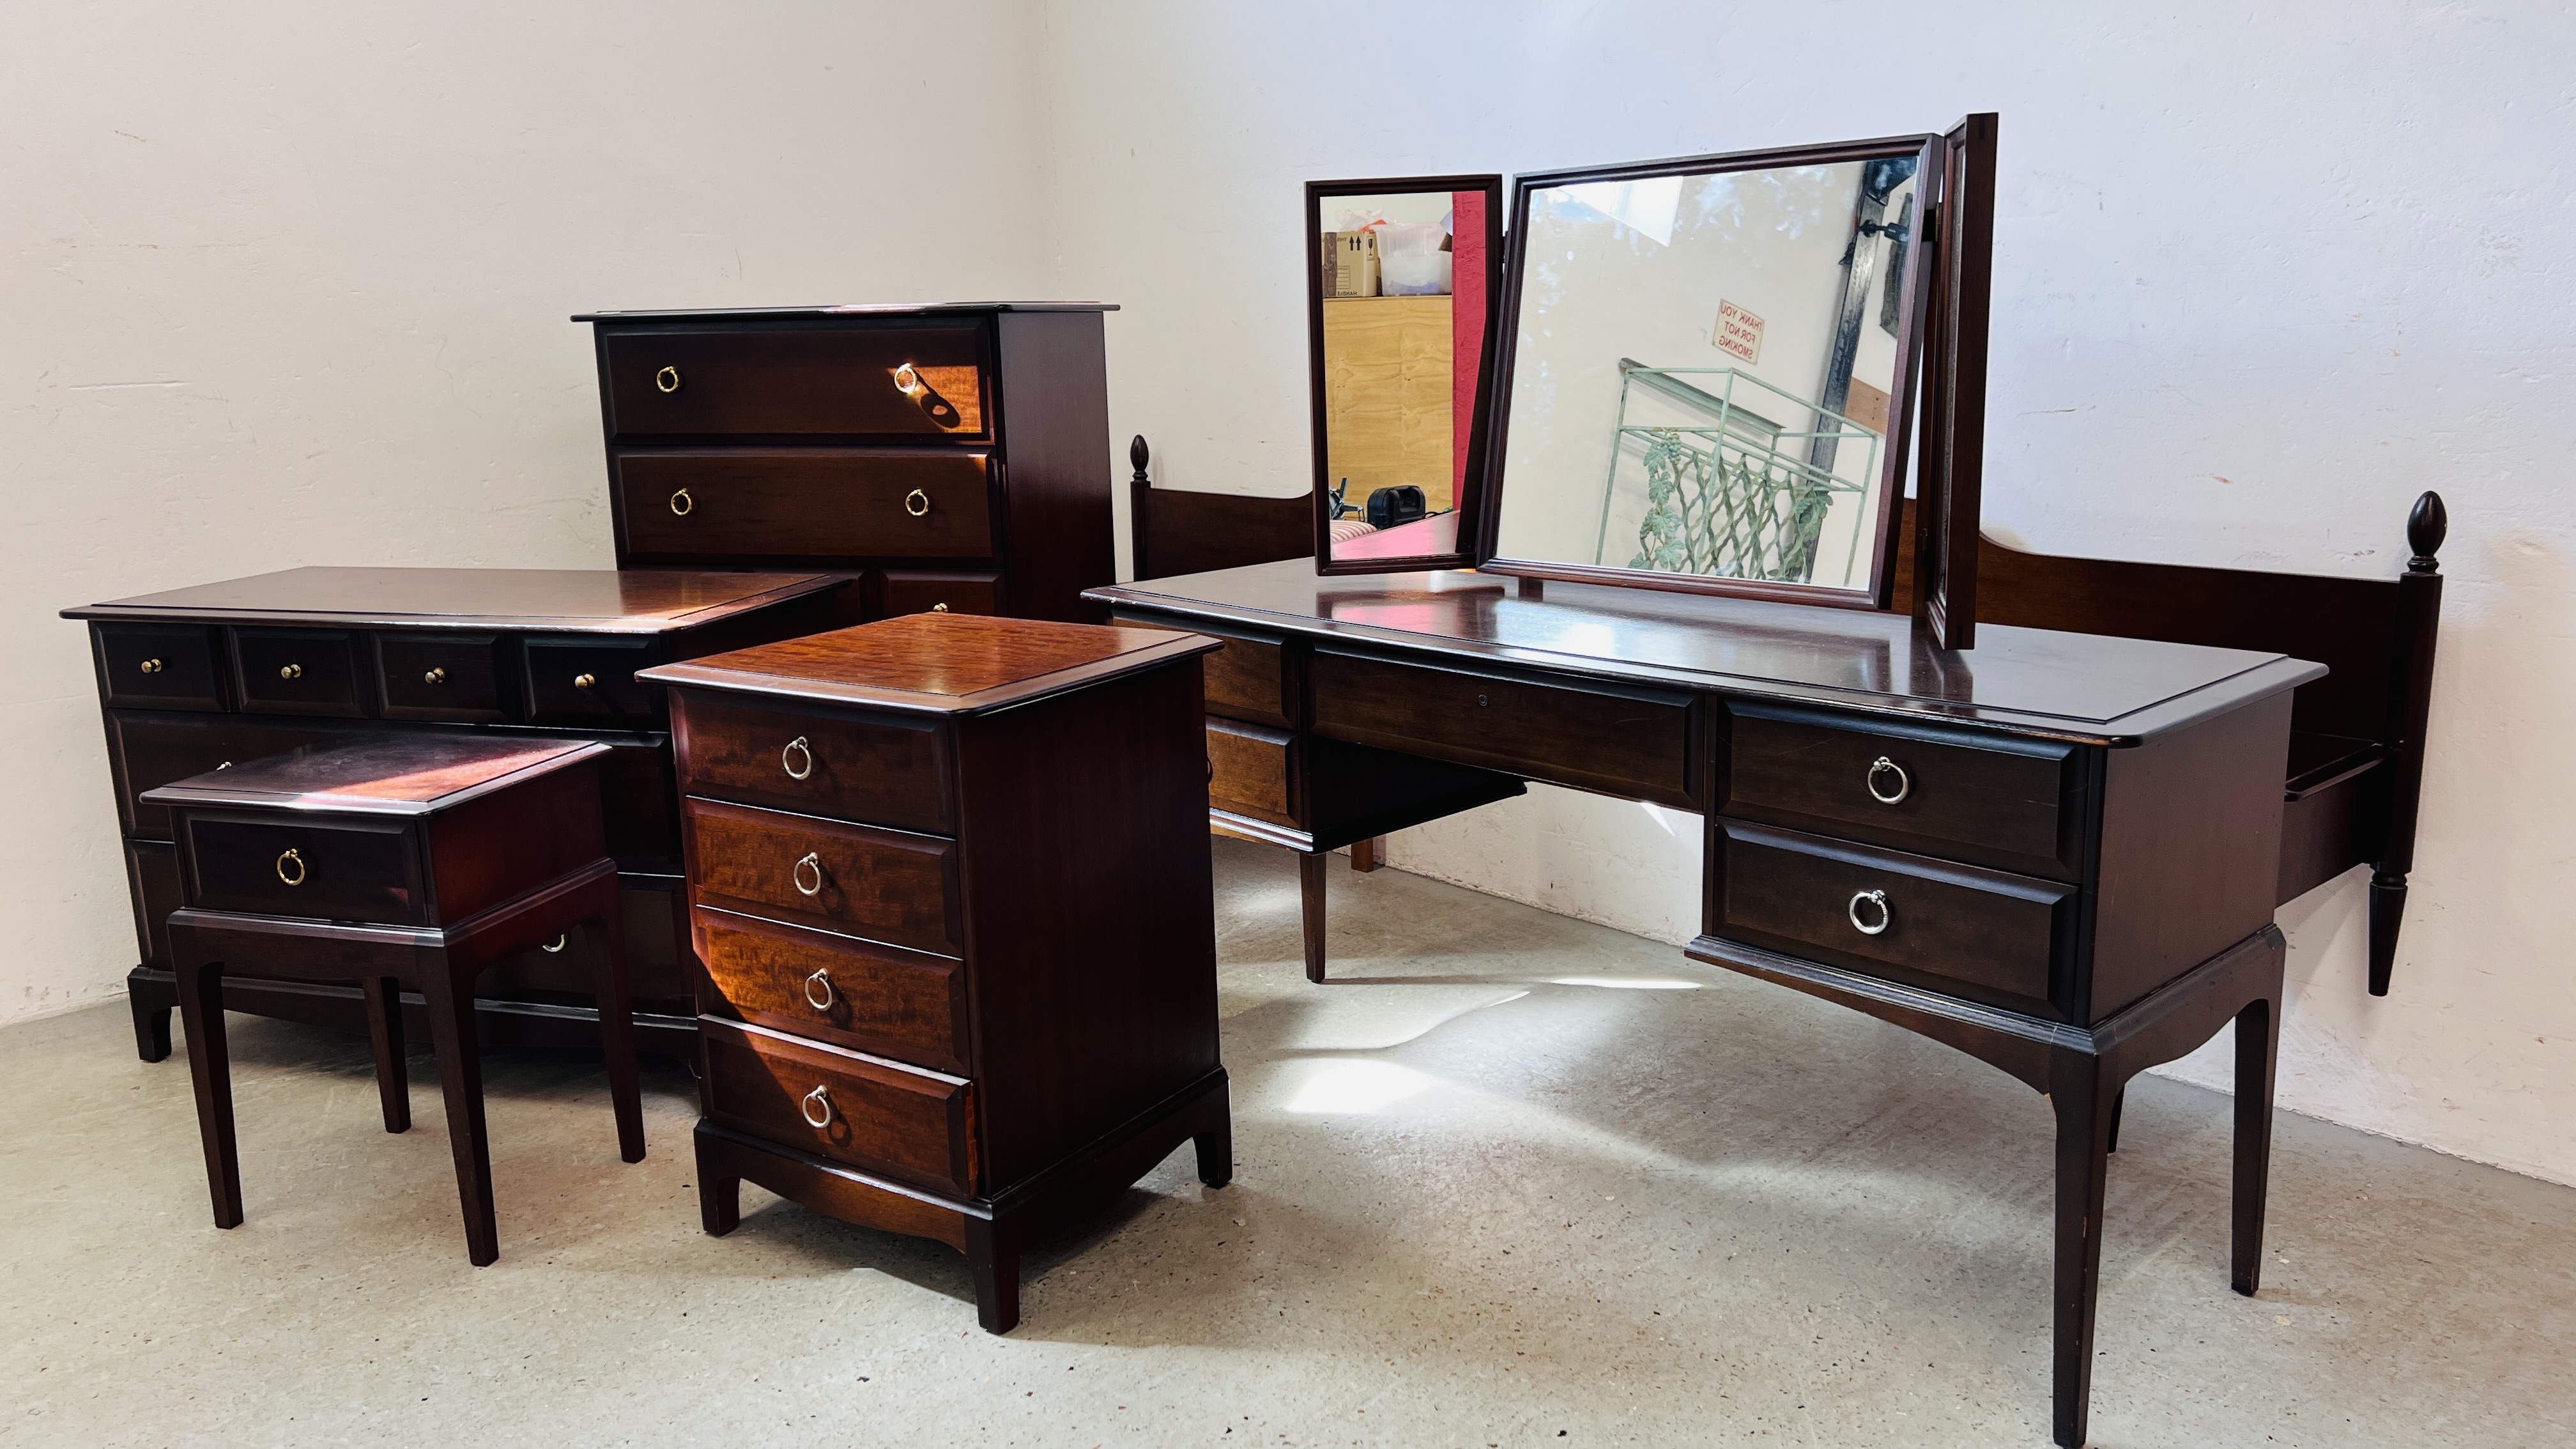 A 6 PIECE SUITE OF STAG MINSTRAL BEDROOM FURNITURE COMPRISING OF 5 DRAWER TRIPLE MIRROR DRESSING - Image 14 of 14